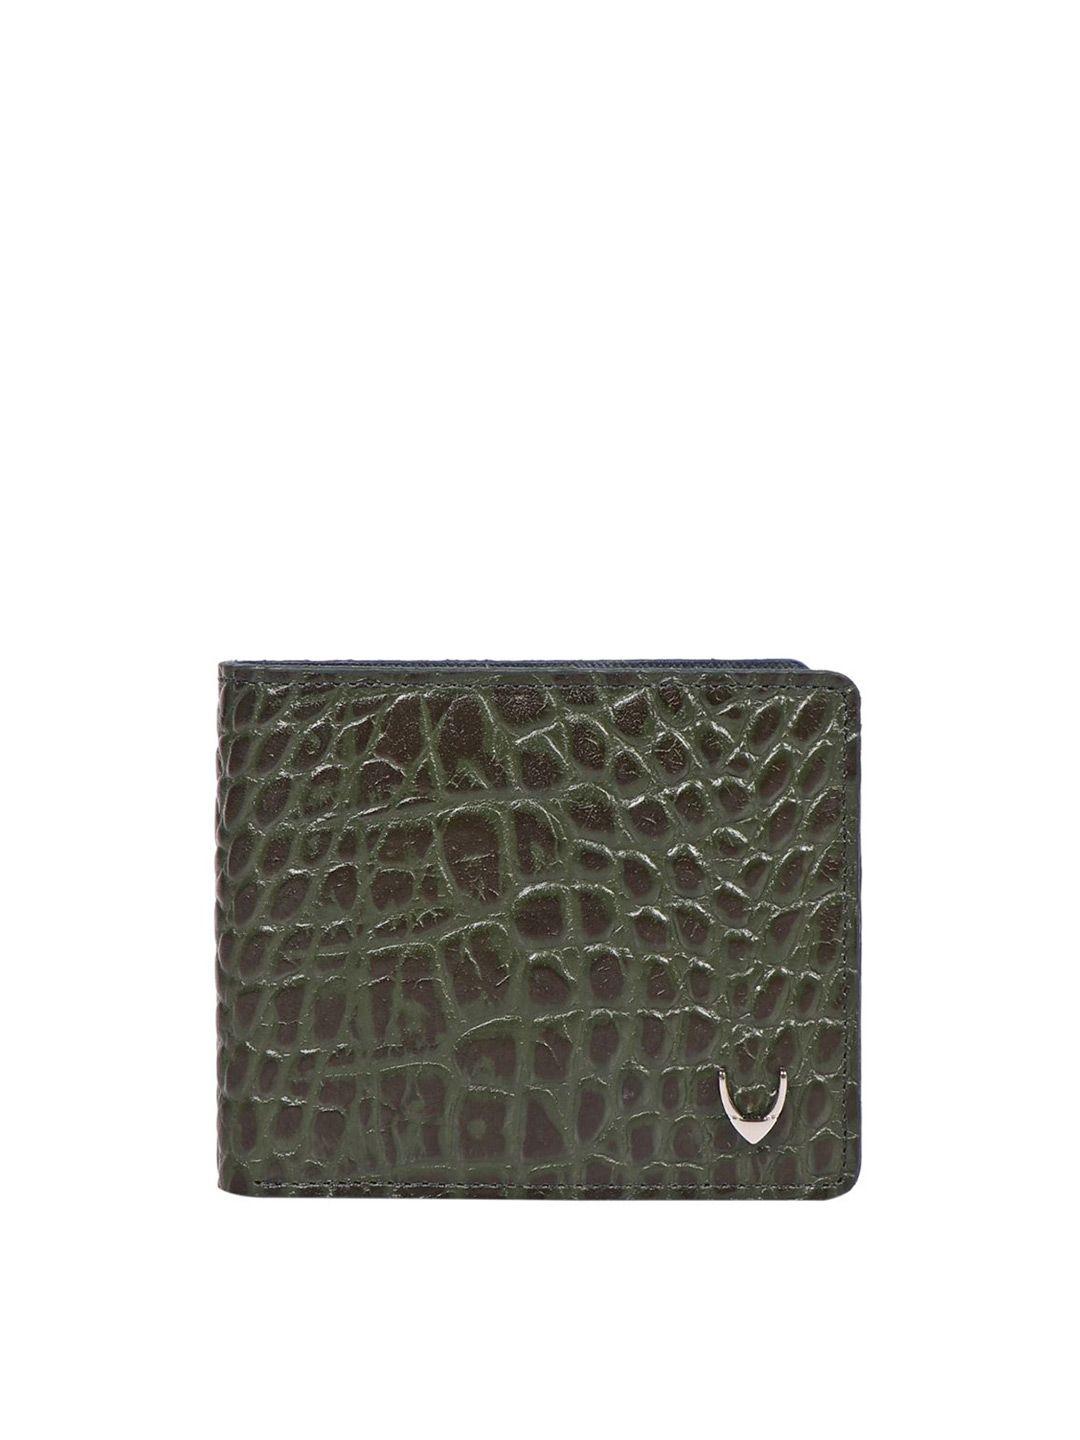 hidesign-men-textured-leather-two-fold-wallet